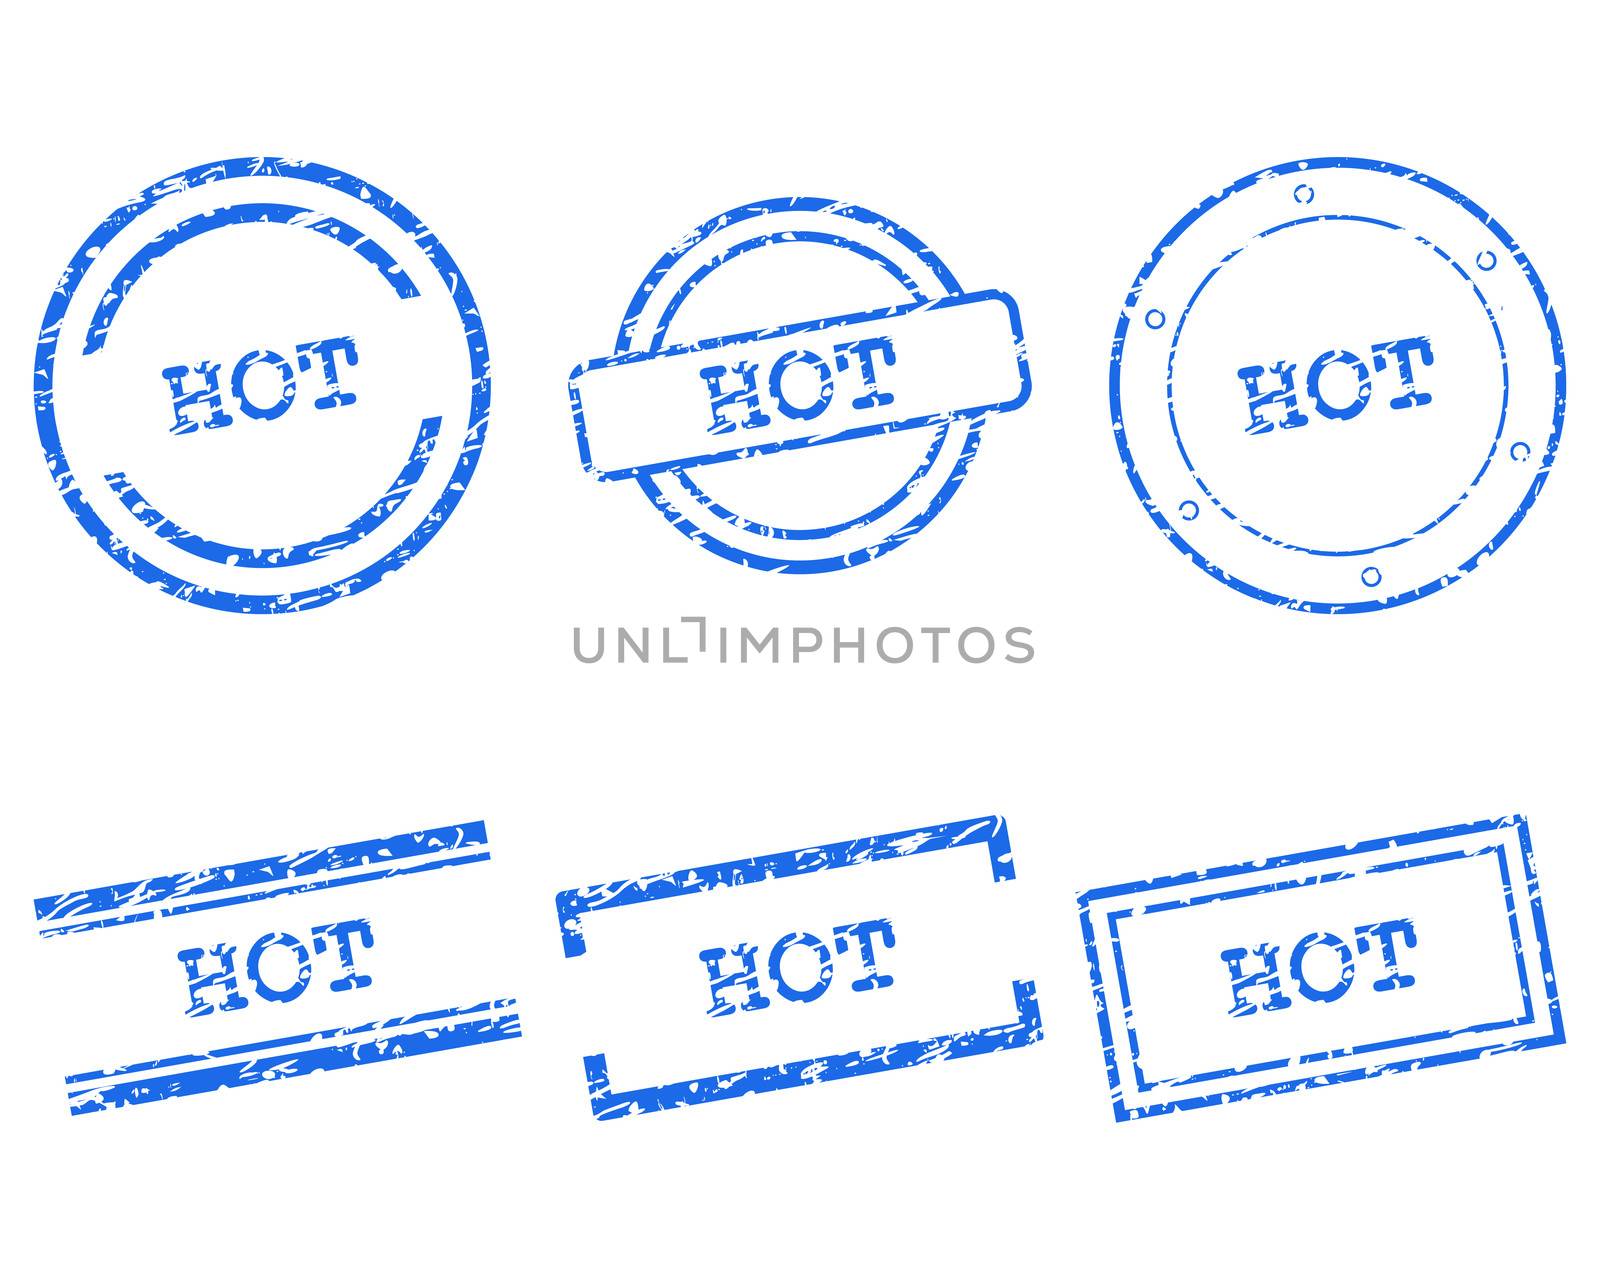 Hot stamps by rbiedermann